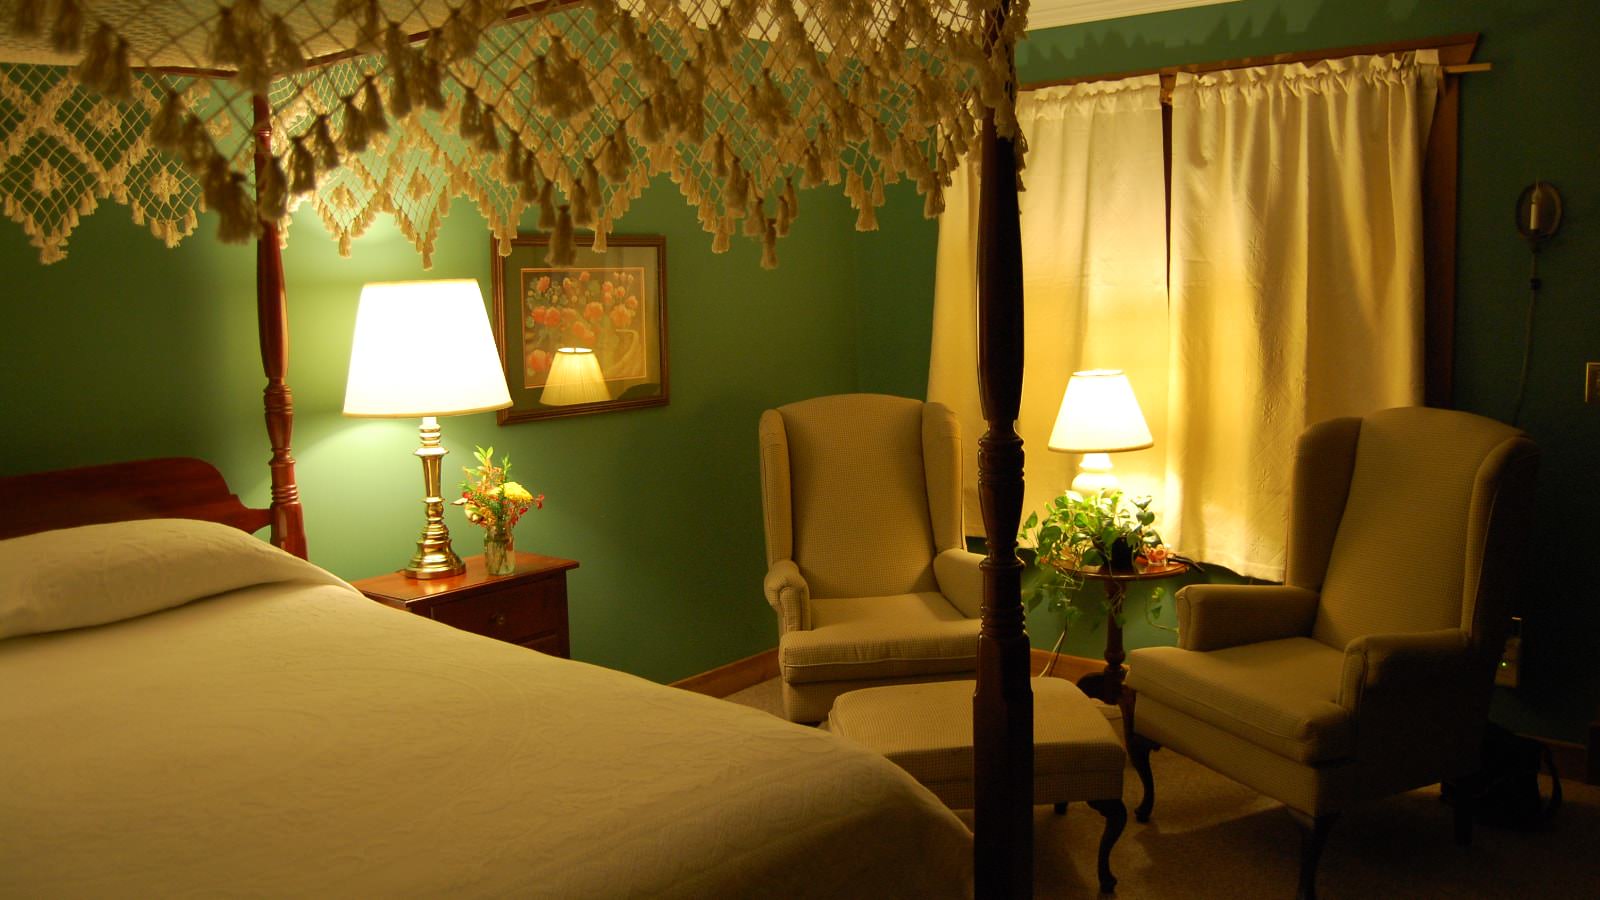 Bedroom with dark green walls, carpeting, four poster bed with canopy and white bedding, and sitting area